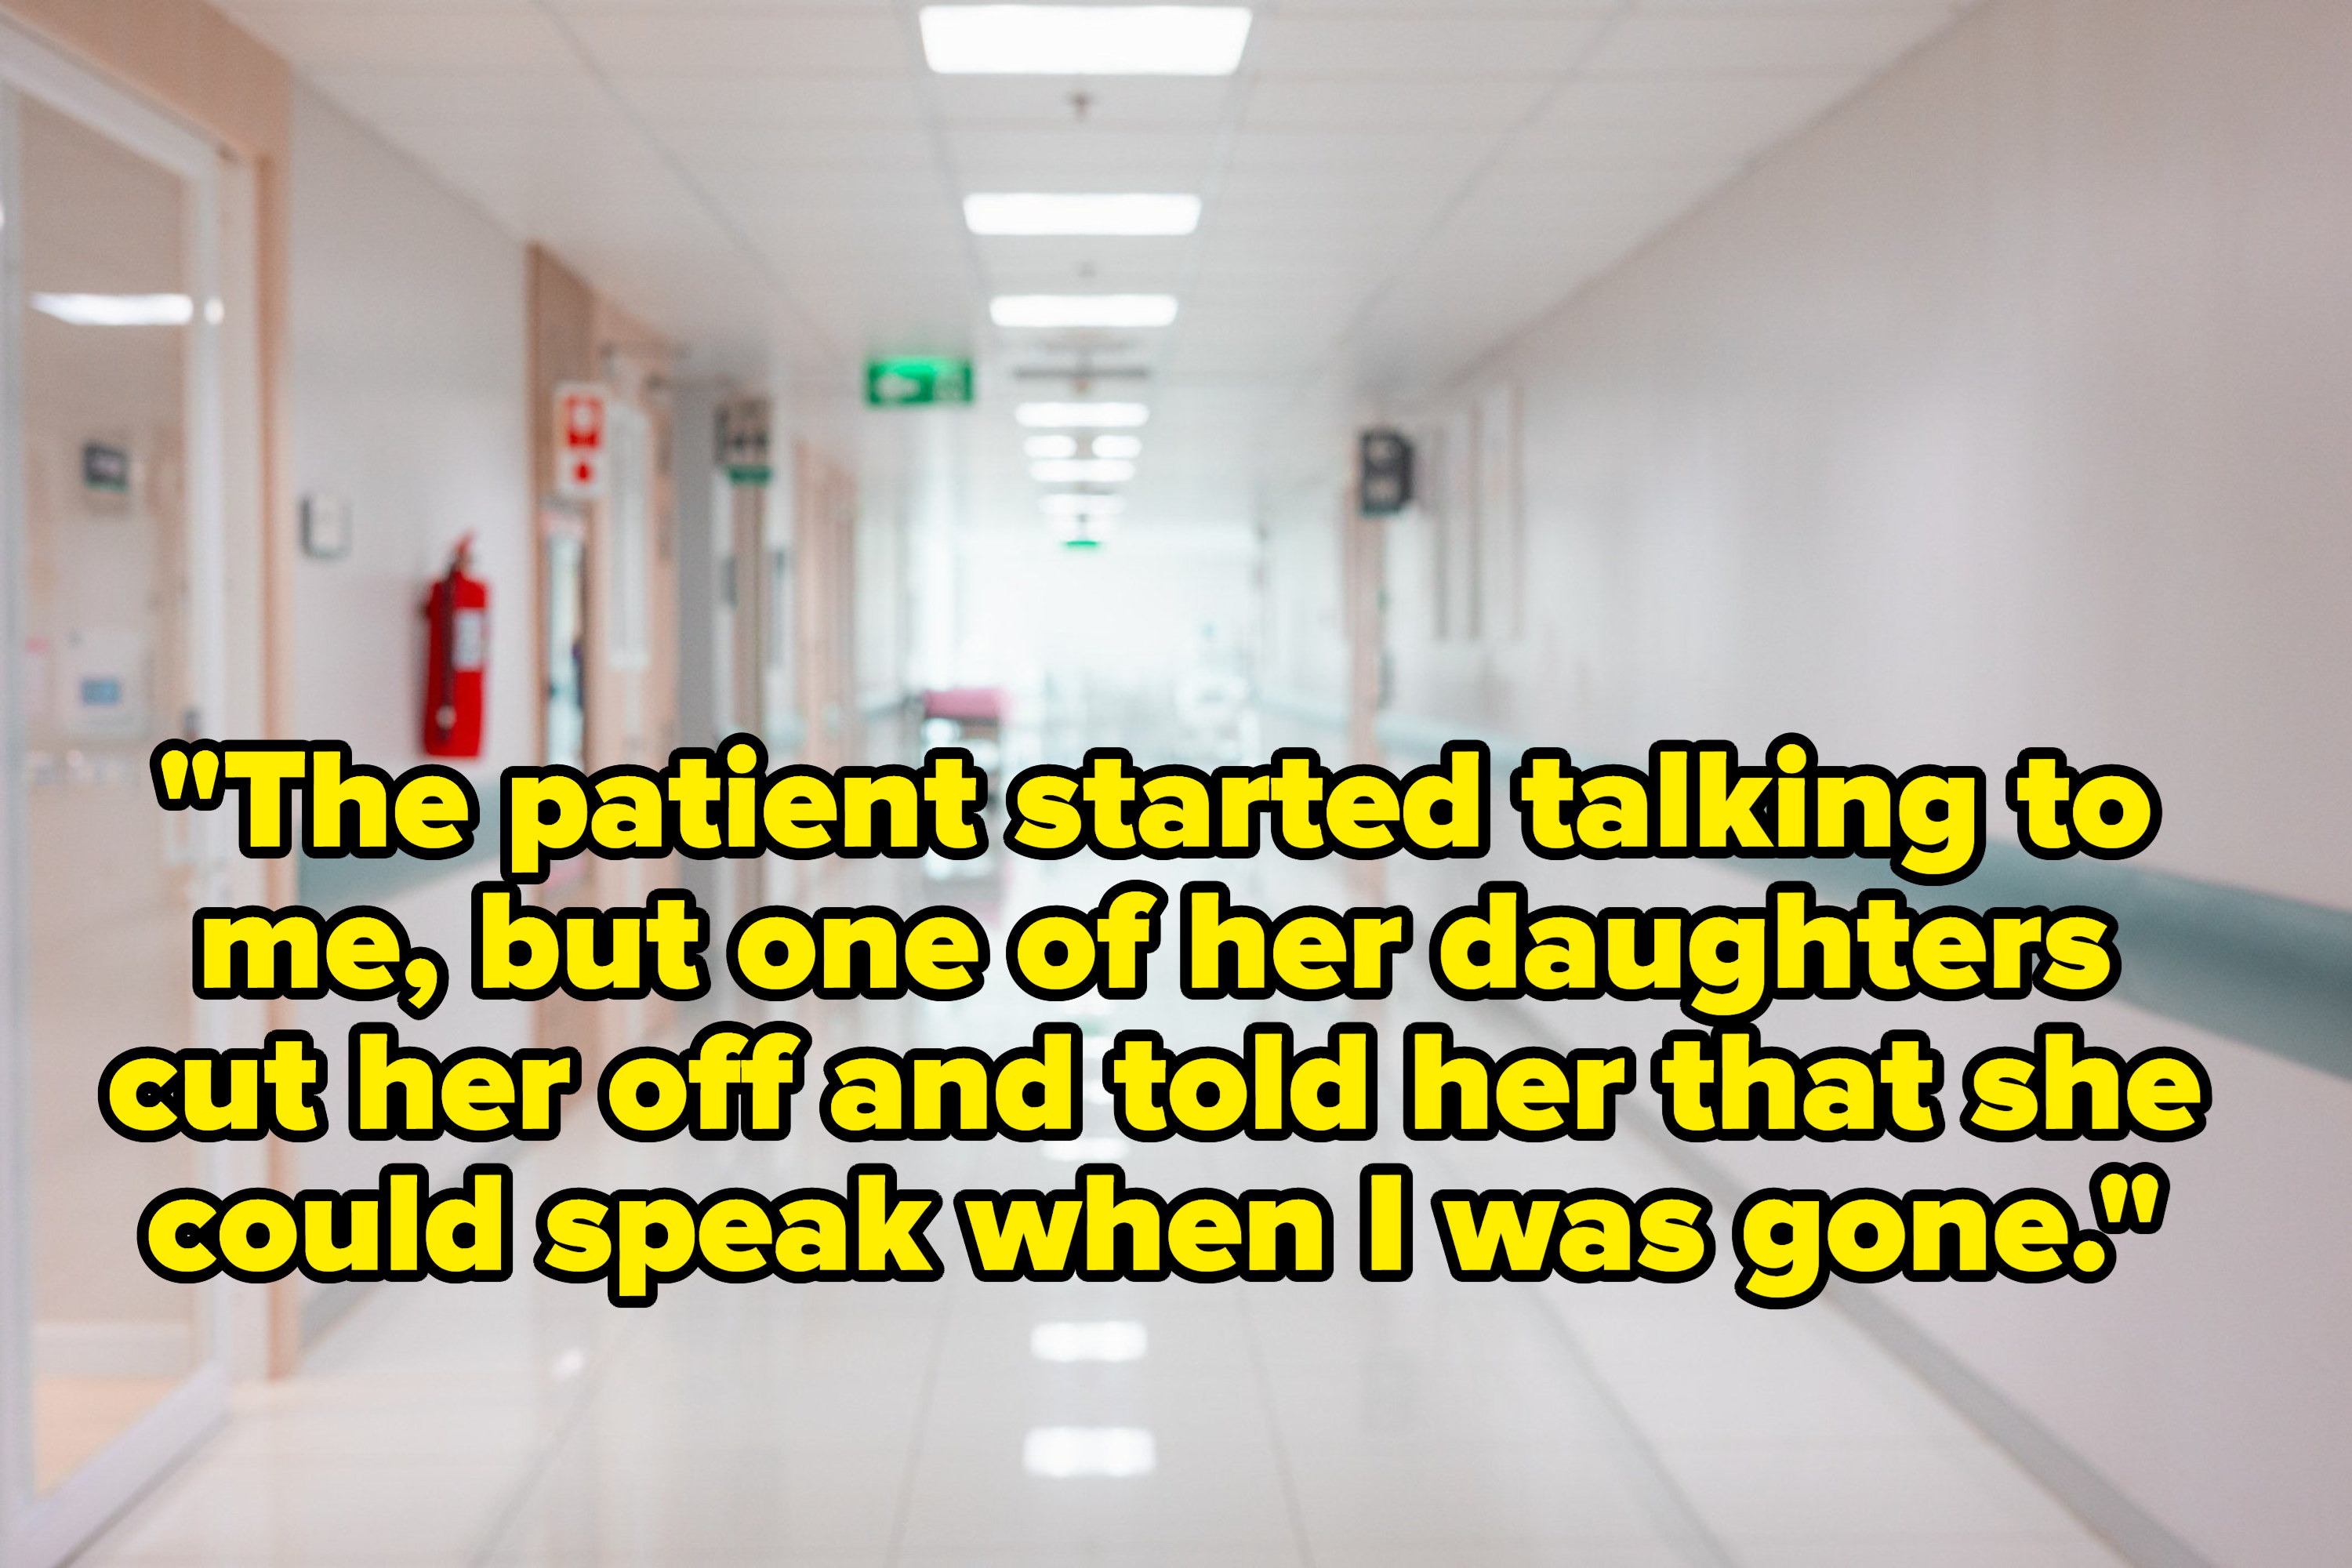 hallway of a hospital with the text, &quot;&quot;The patient started talking to me, but one of her daughters cut her off and told her that she could speak when I was gone&quot;